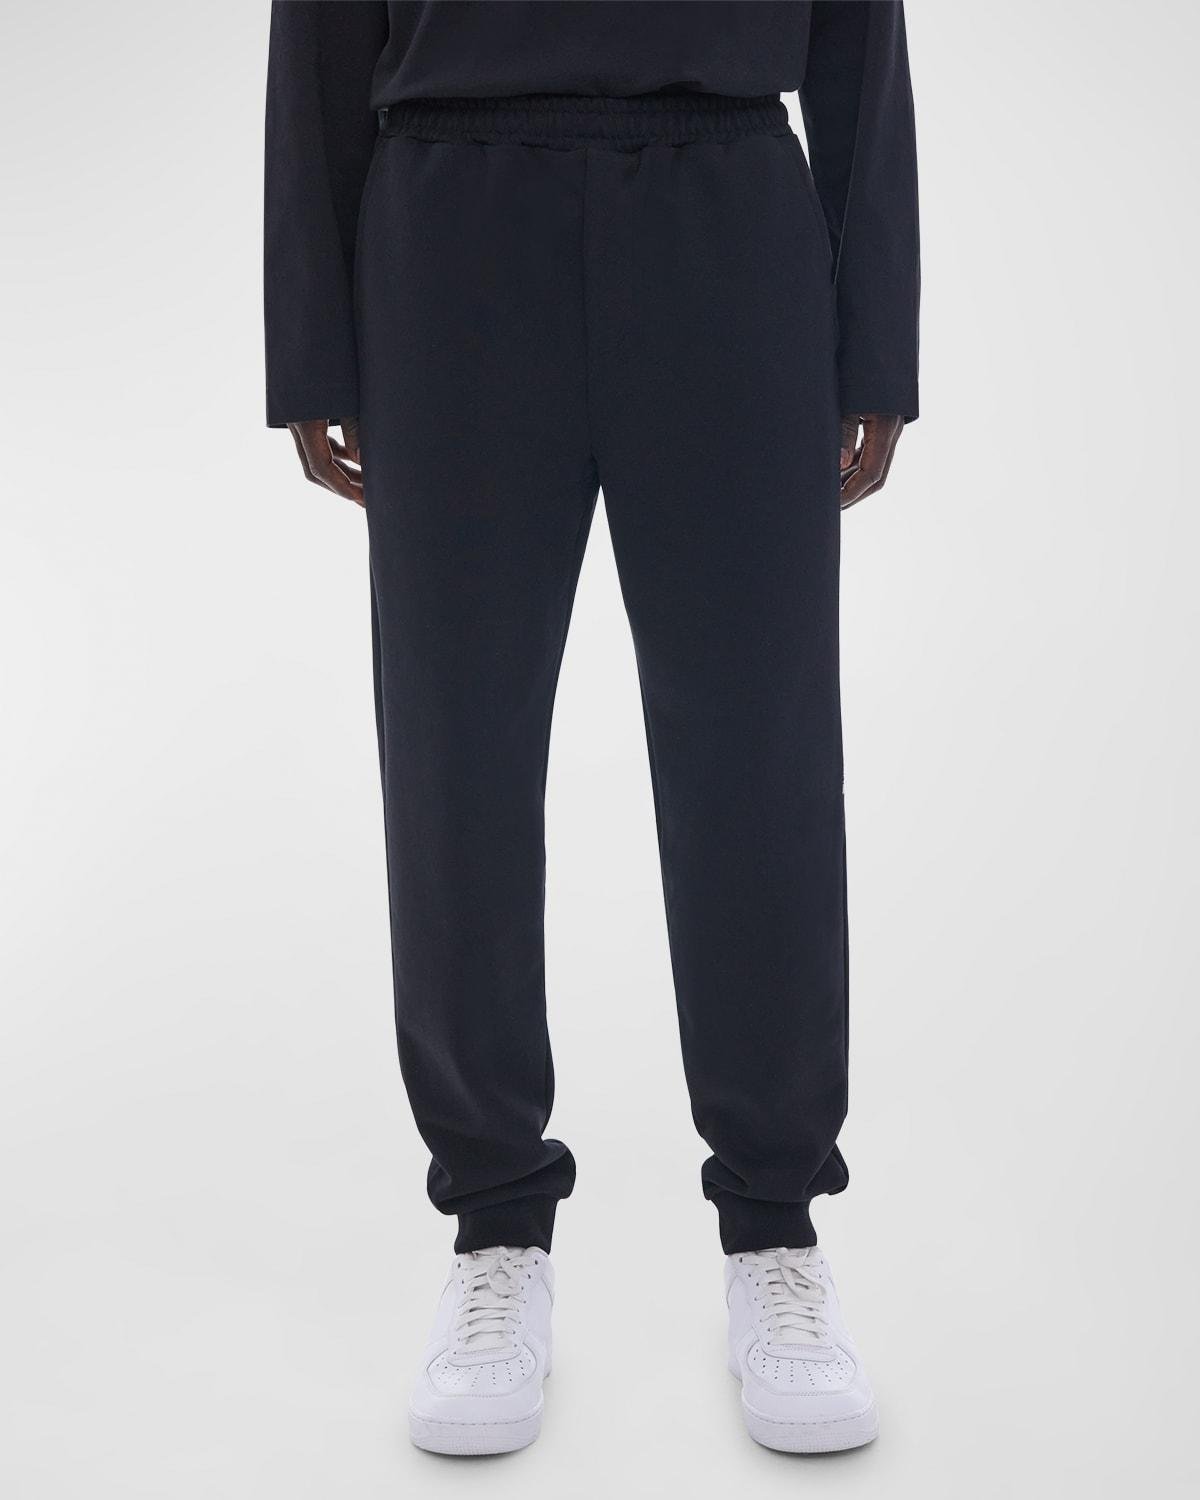 Men's Jogger Pants with Side Logo by HELMUT LANG